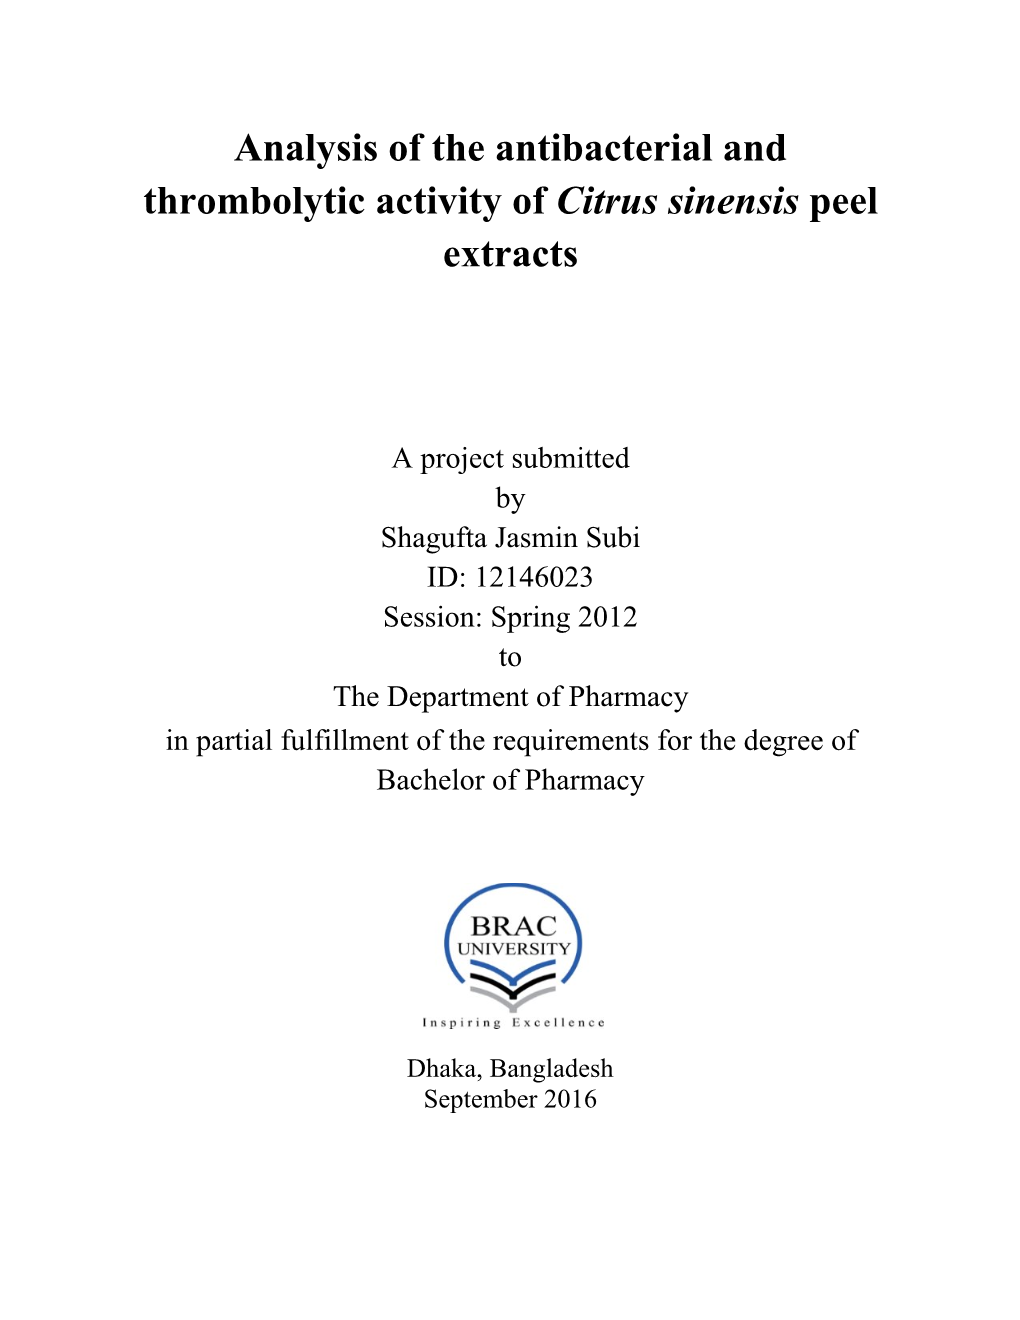 Analysis of the Antibacterial and Thrombolytic Activity of Citrus Sinensis Peel Extracts